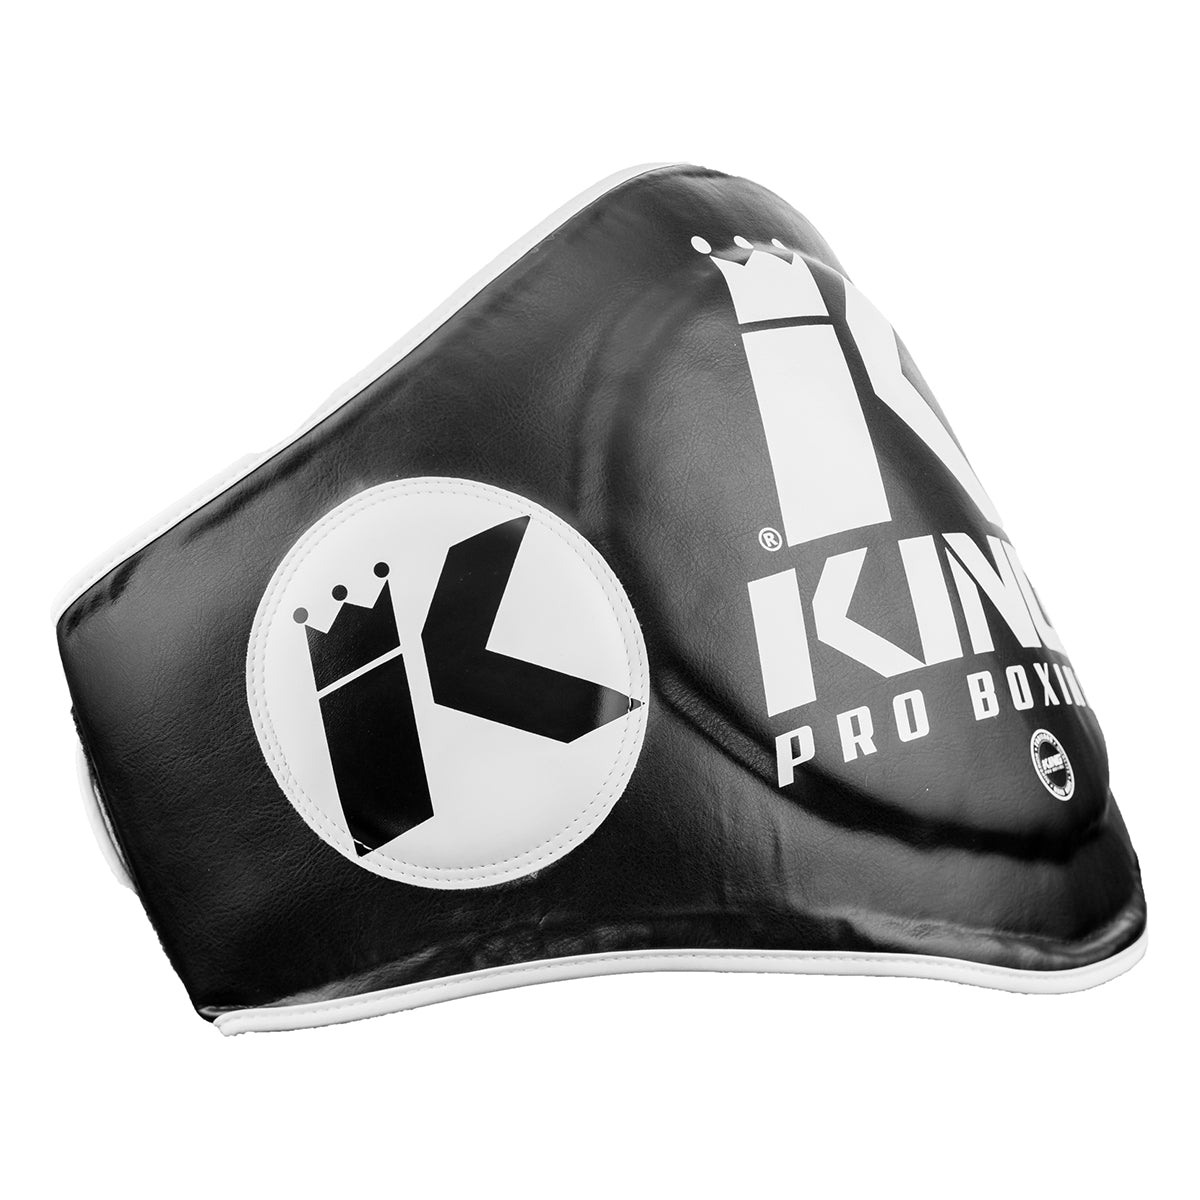 King PRO boxing Belly pad - BP